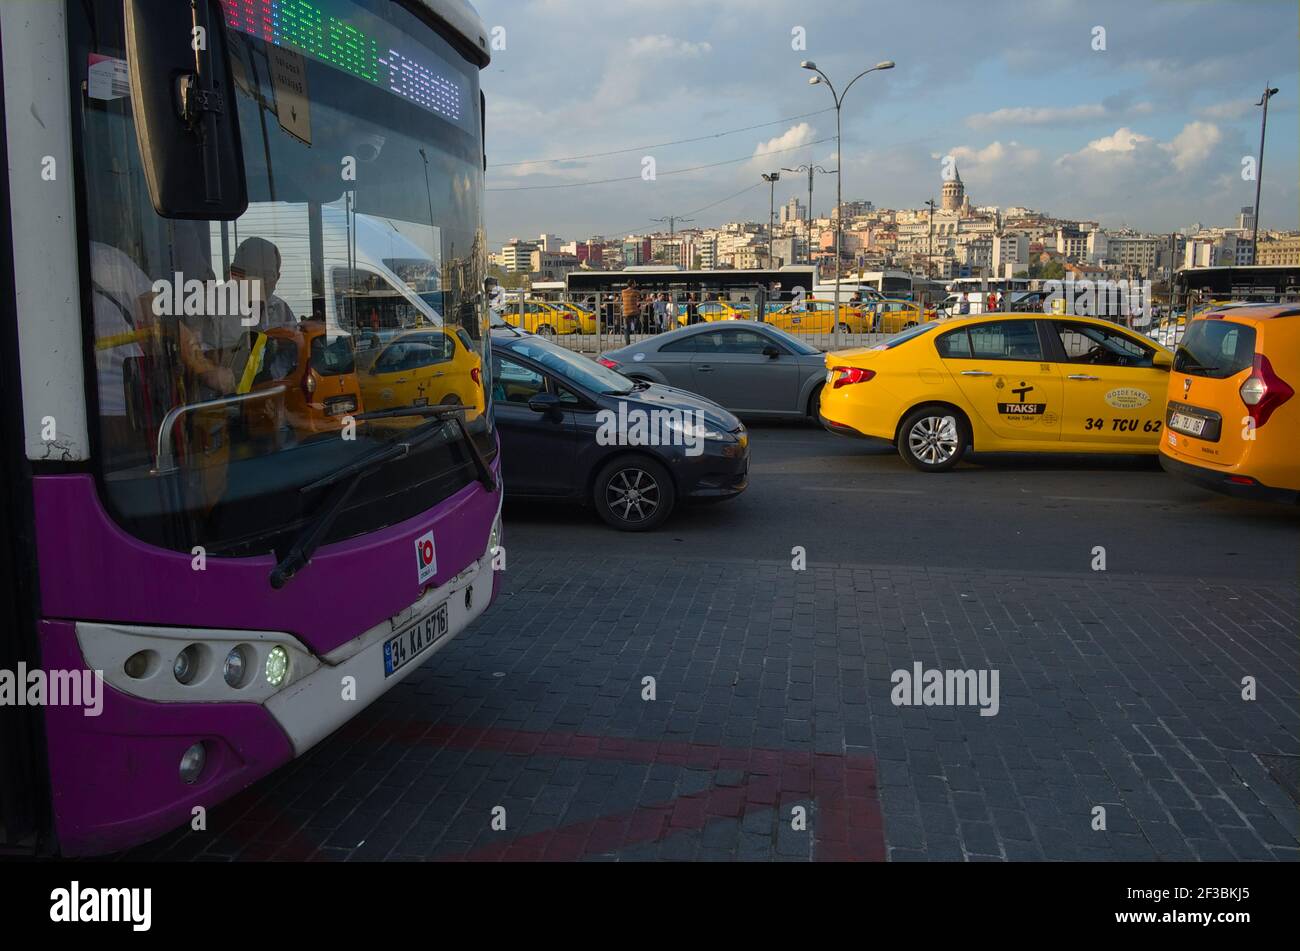 Istanbul, Turkey - September, 2018: Public bus stop and yellow taxi cabs against Galata Tower view. Traffic on roads in Istanbul Stock Photo